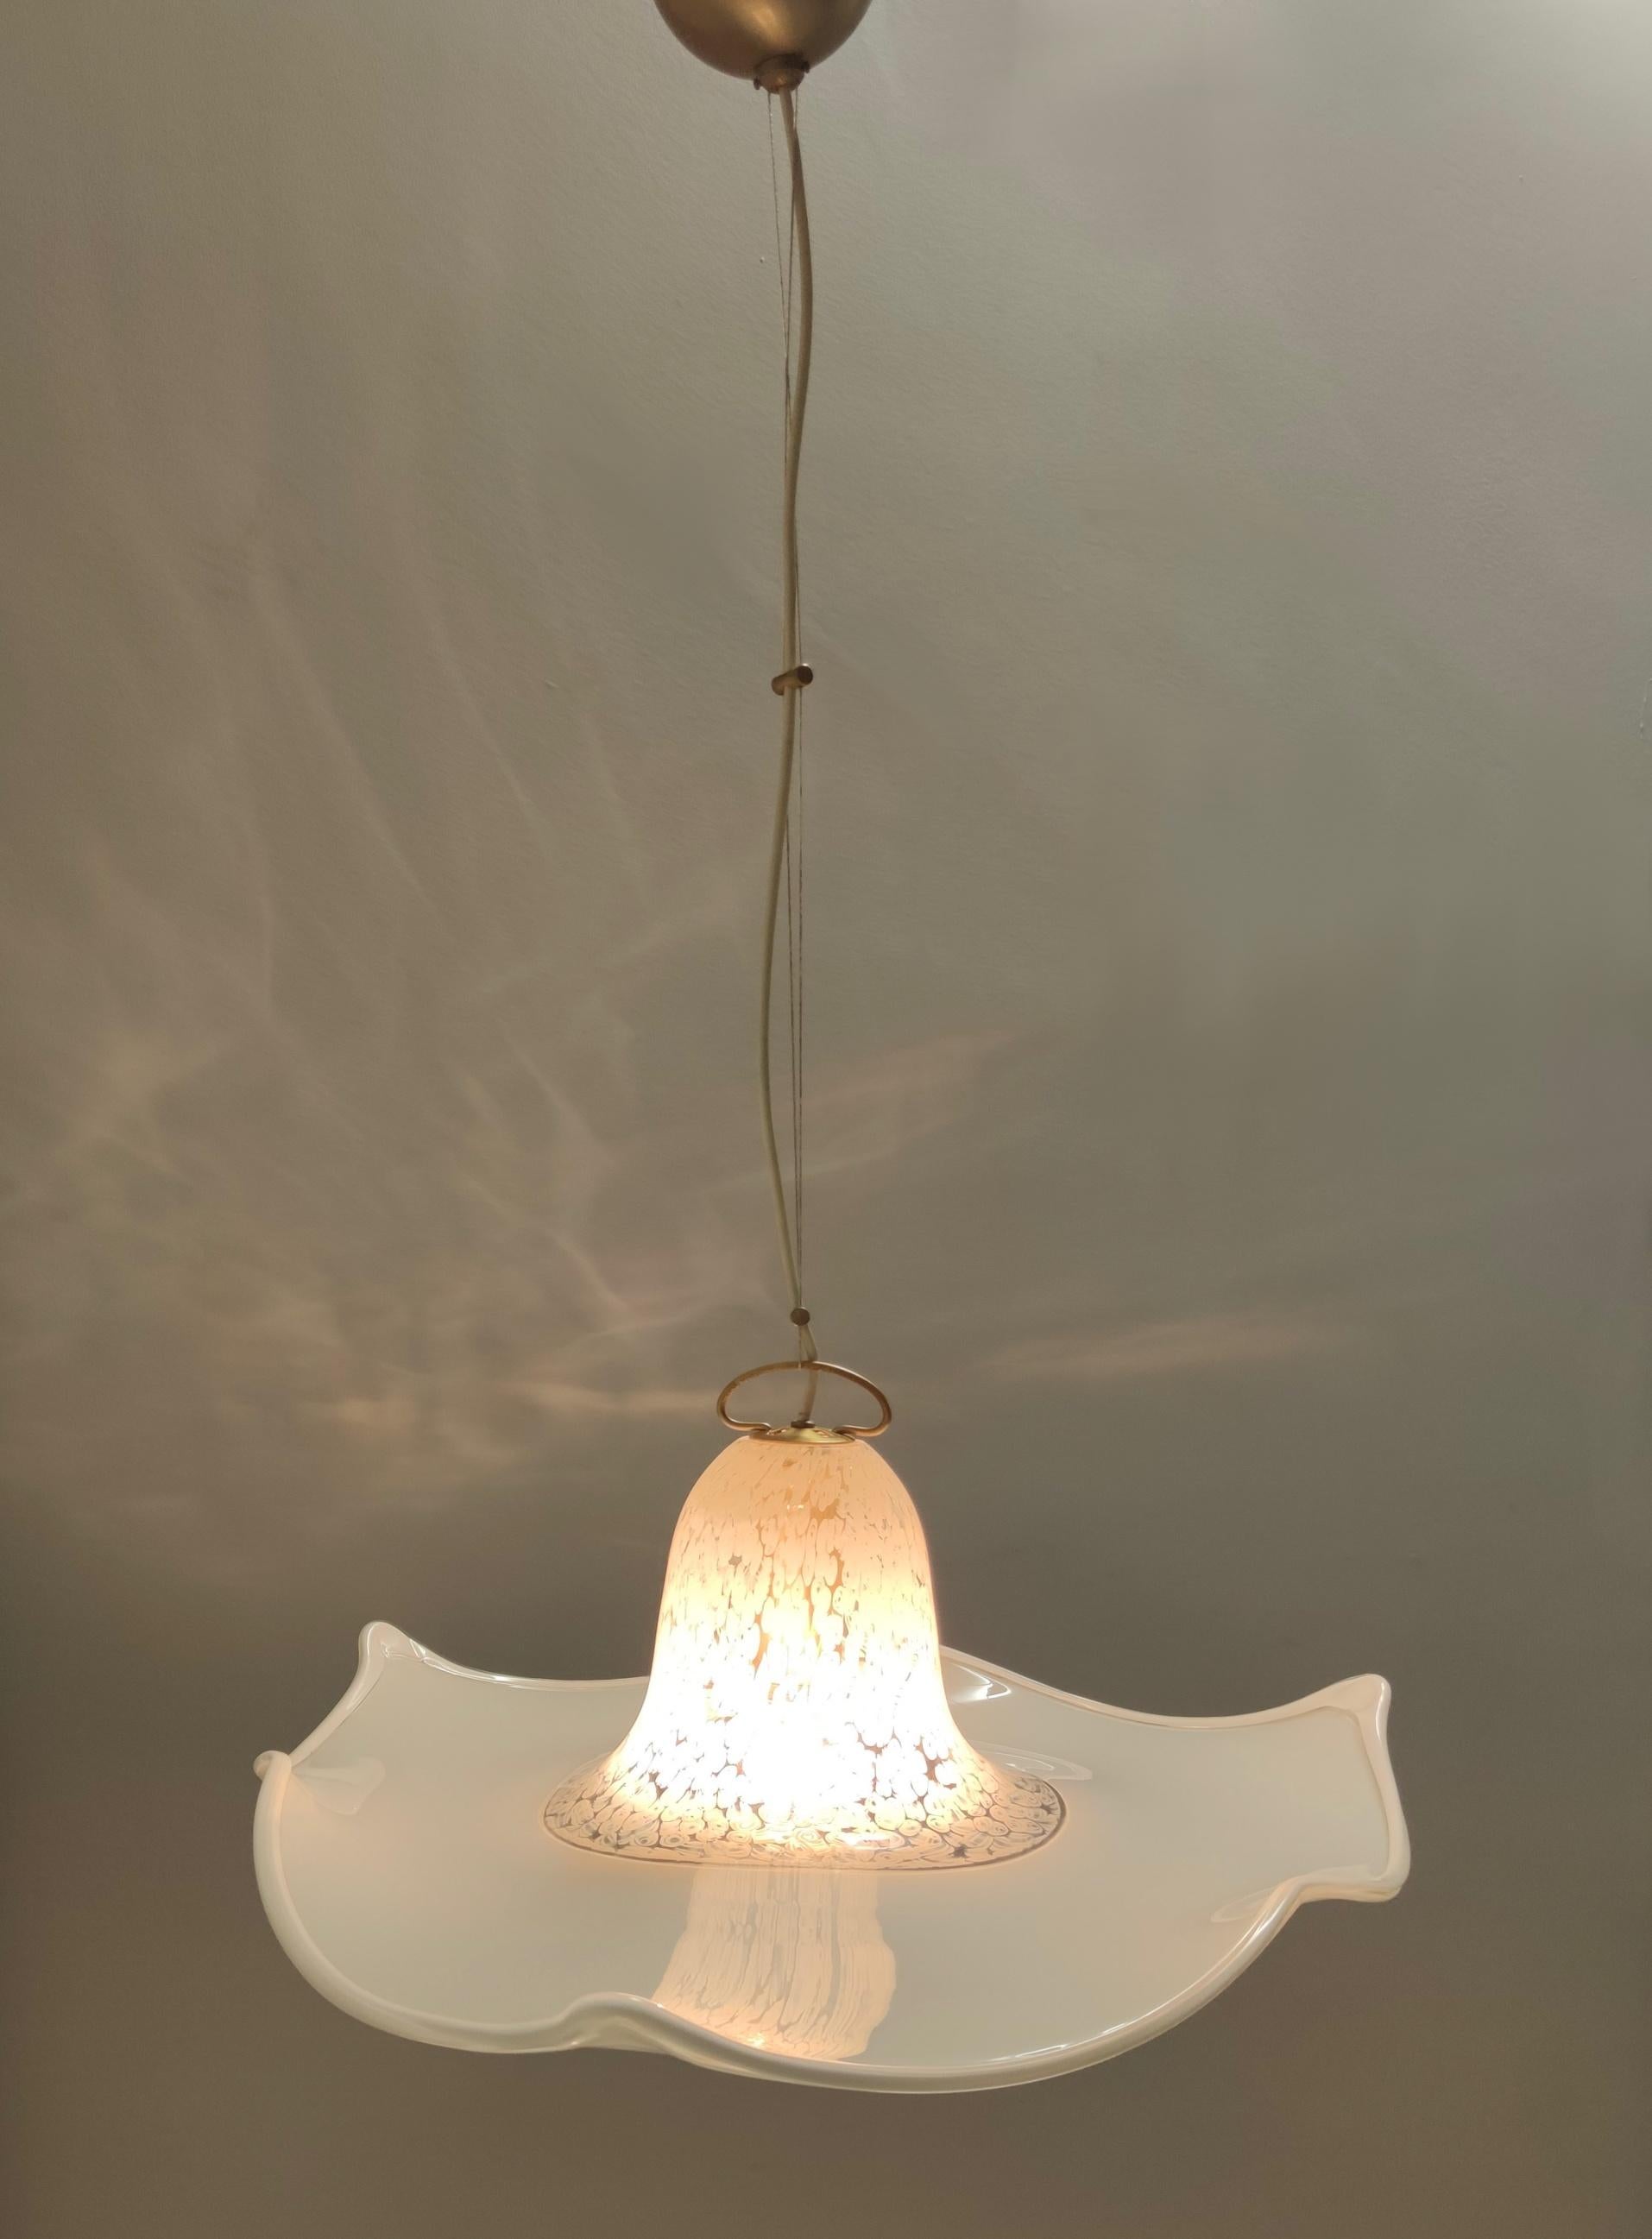 Made in Italy, 1980s. 
This pendant features a white Murano glass lampshade.
It is marked.
This pendant is a vintage piece, therefore it might show slight traces of use, but it can be considered as in excellent original condition and ready to give